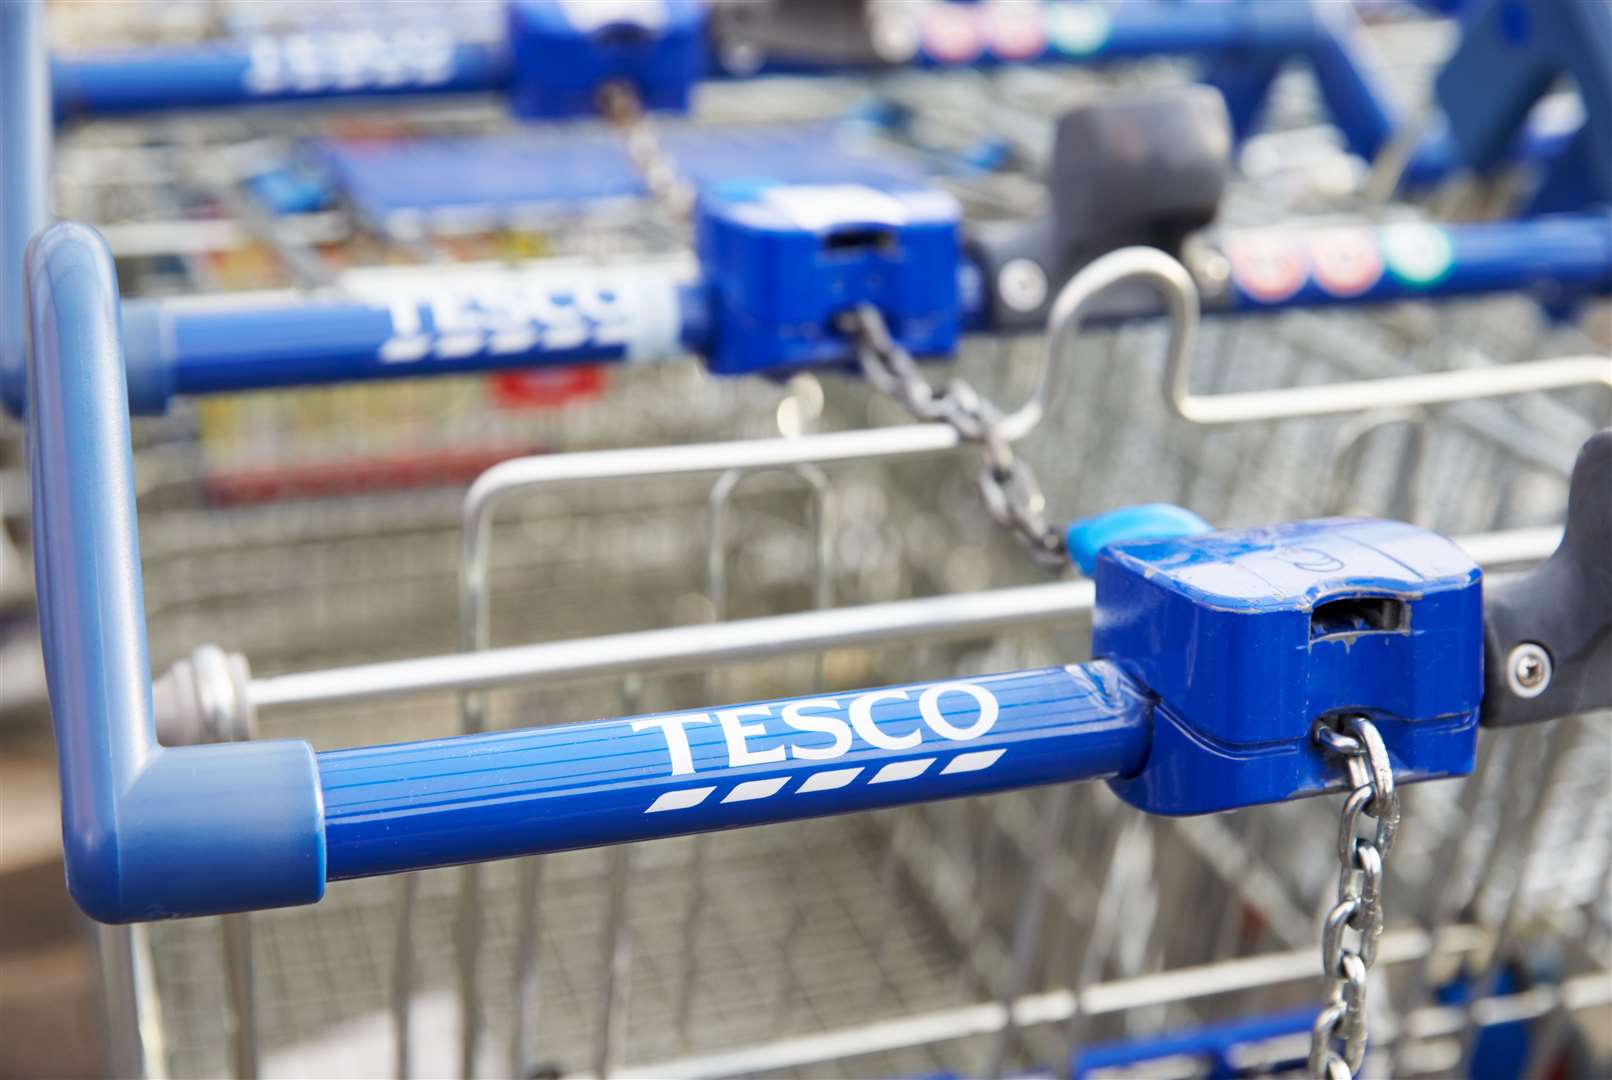 Tesco is recalling packets of stuffing mix. Image: iStock.